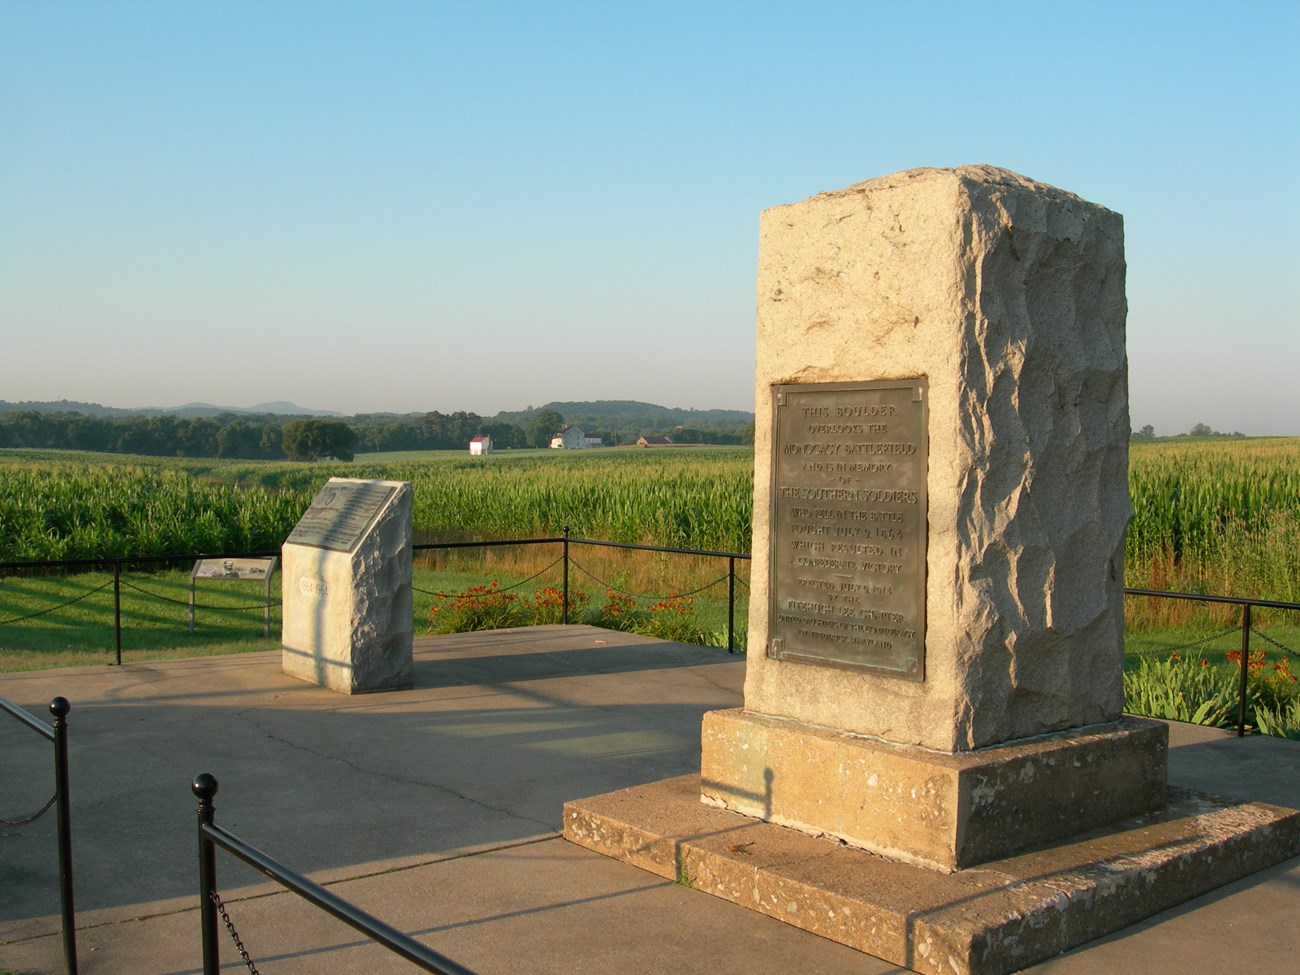 A rough cut 12 foot tall block of granite with a bronze plaque on the front sits in the front. Behind it is a smaller stone monument. Green farm fields are in the background.